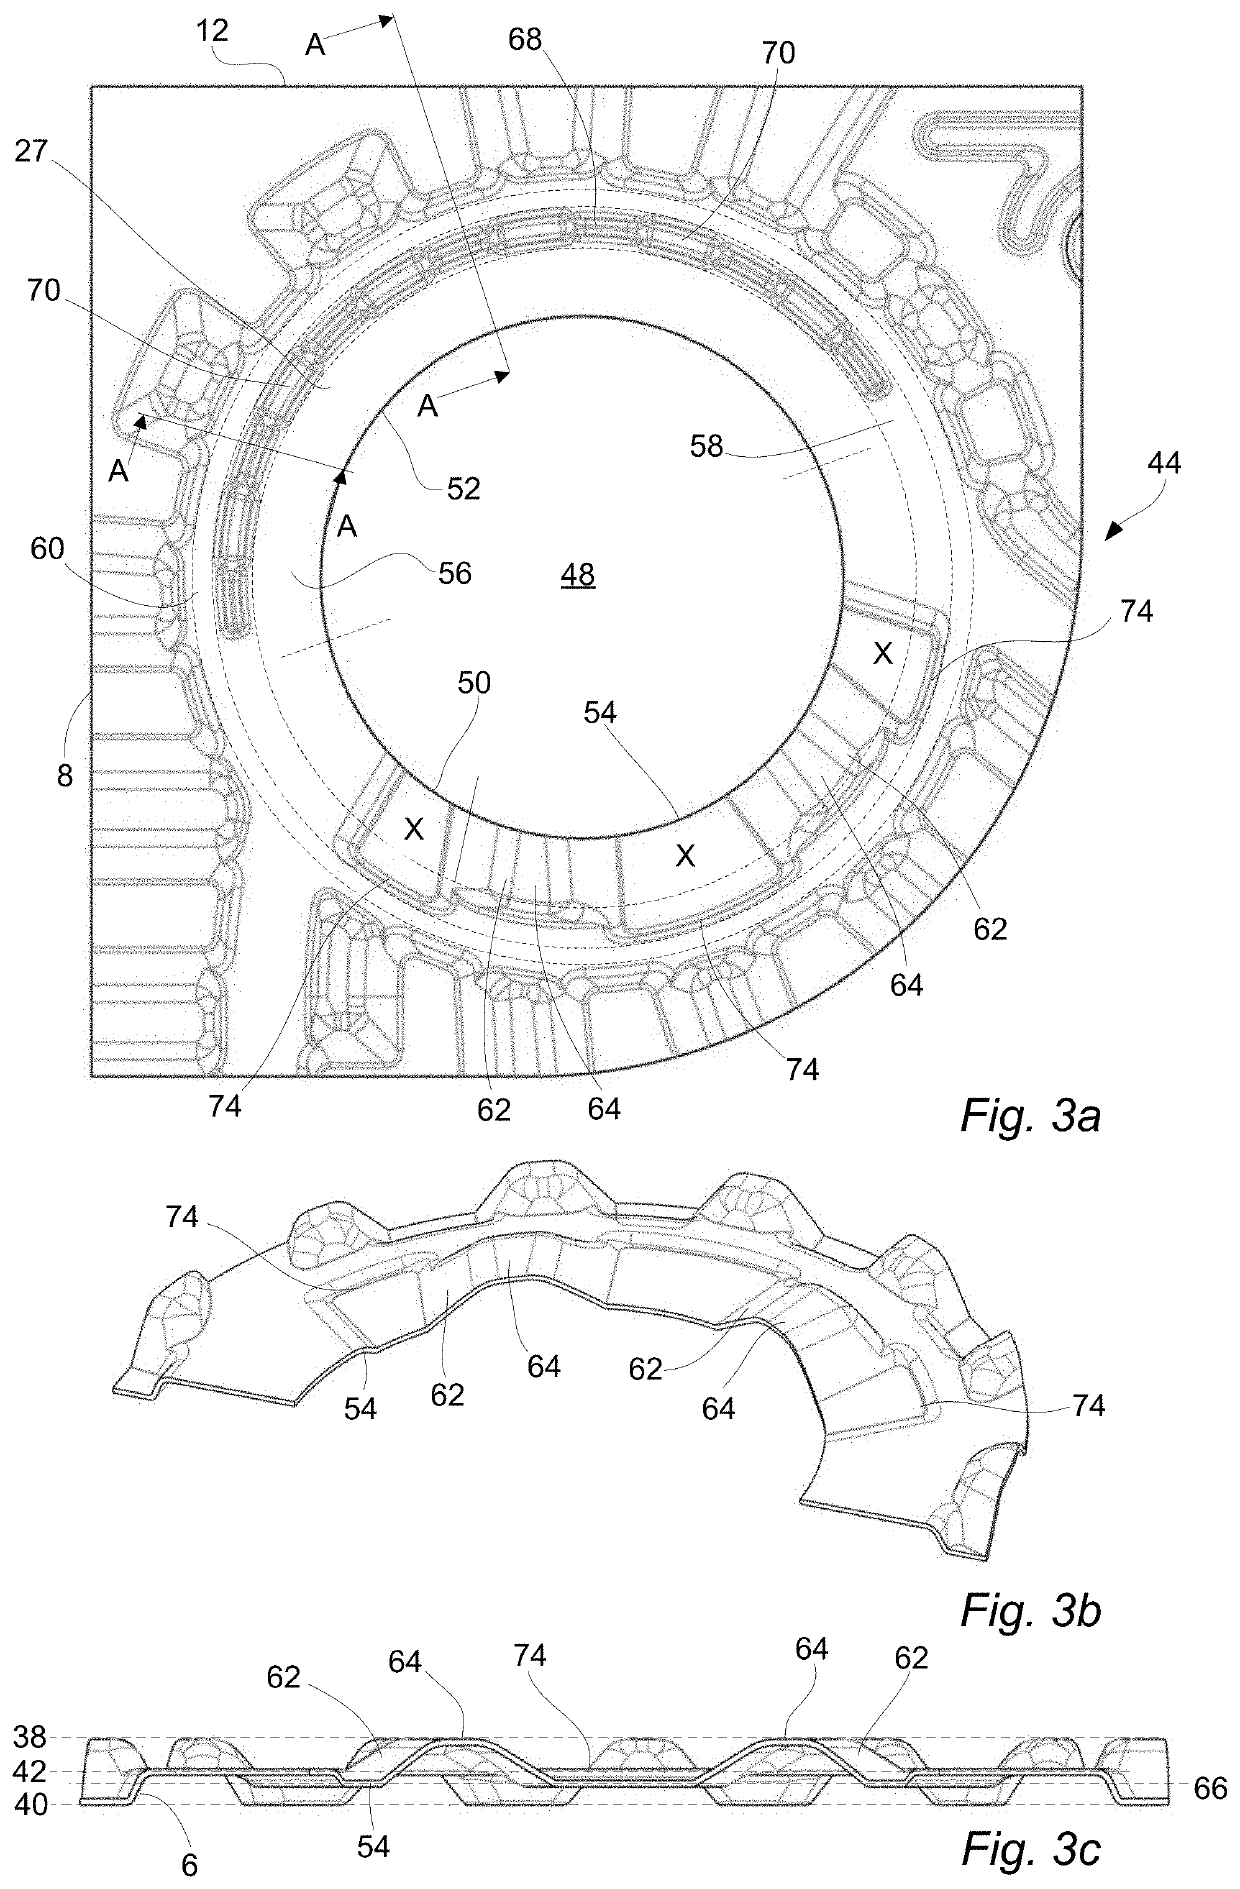 Heat transfer plate and gasket